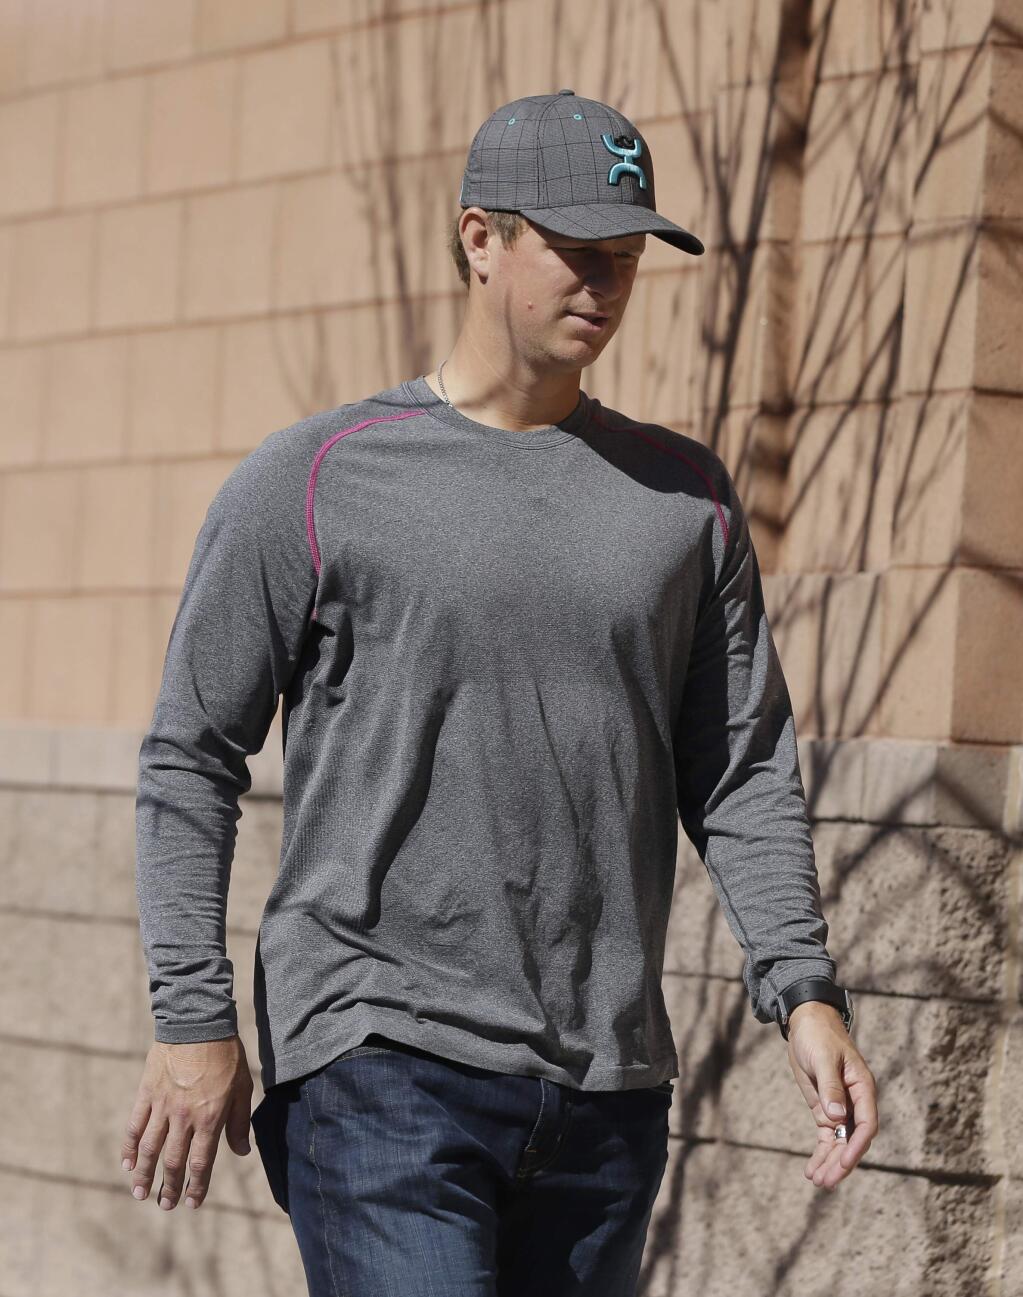 San Francisco Giants' Matt Cain arrives for spring training baseball workouts Wednesday, Feb. 18, 2015, in Scottsdale, Ariz. Giants pitchers and catchers have their first official workout scheduled for Thursday. (AP Photo/Darron Cummings)